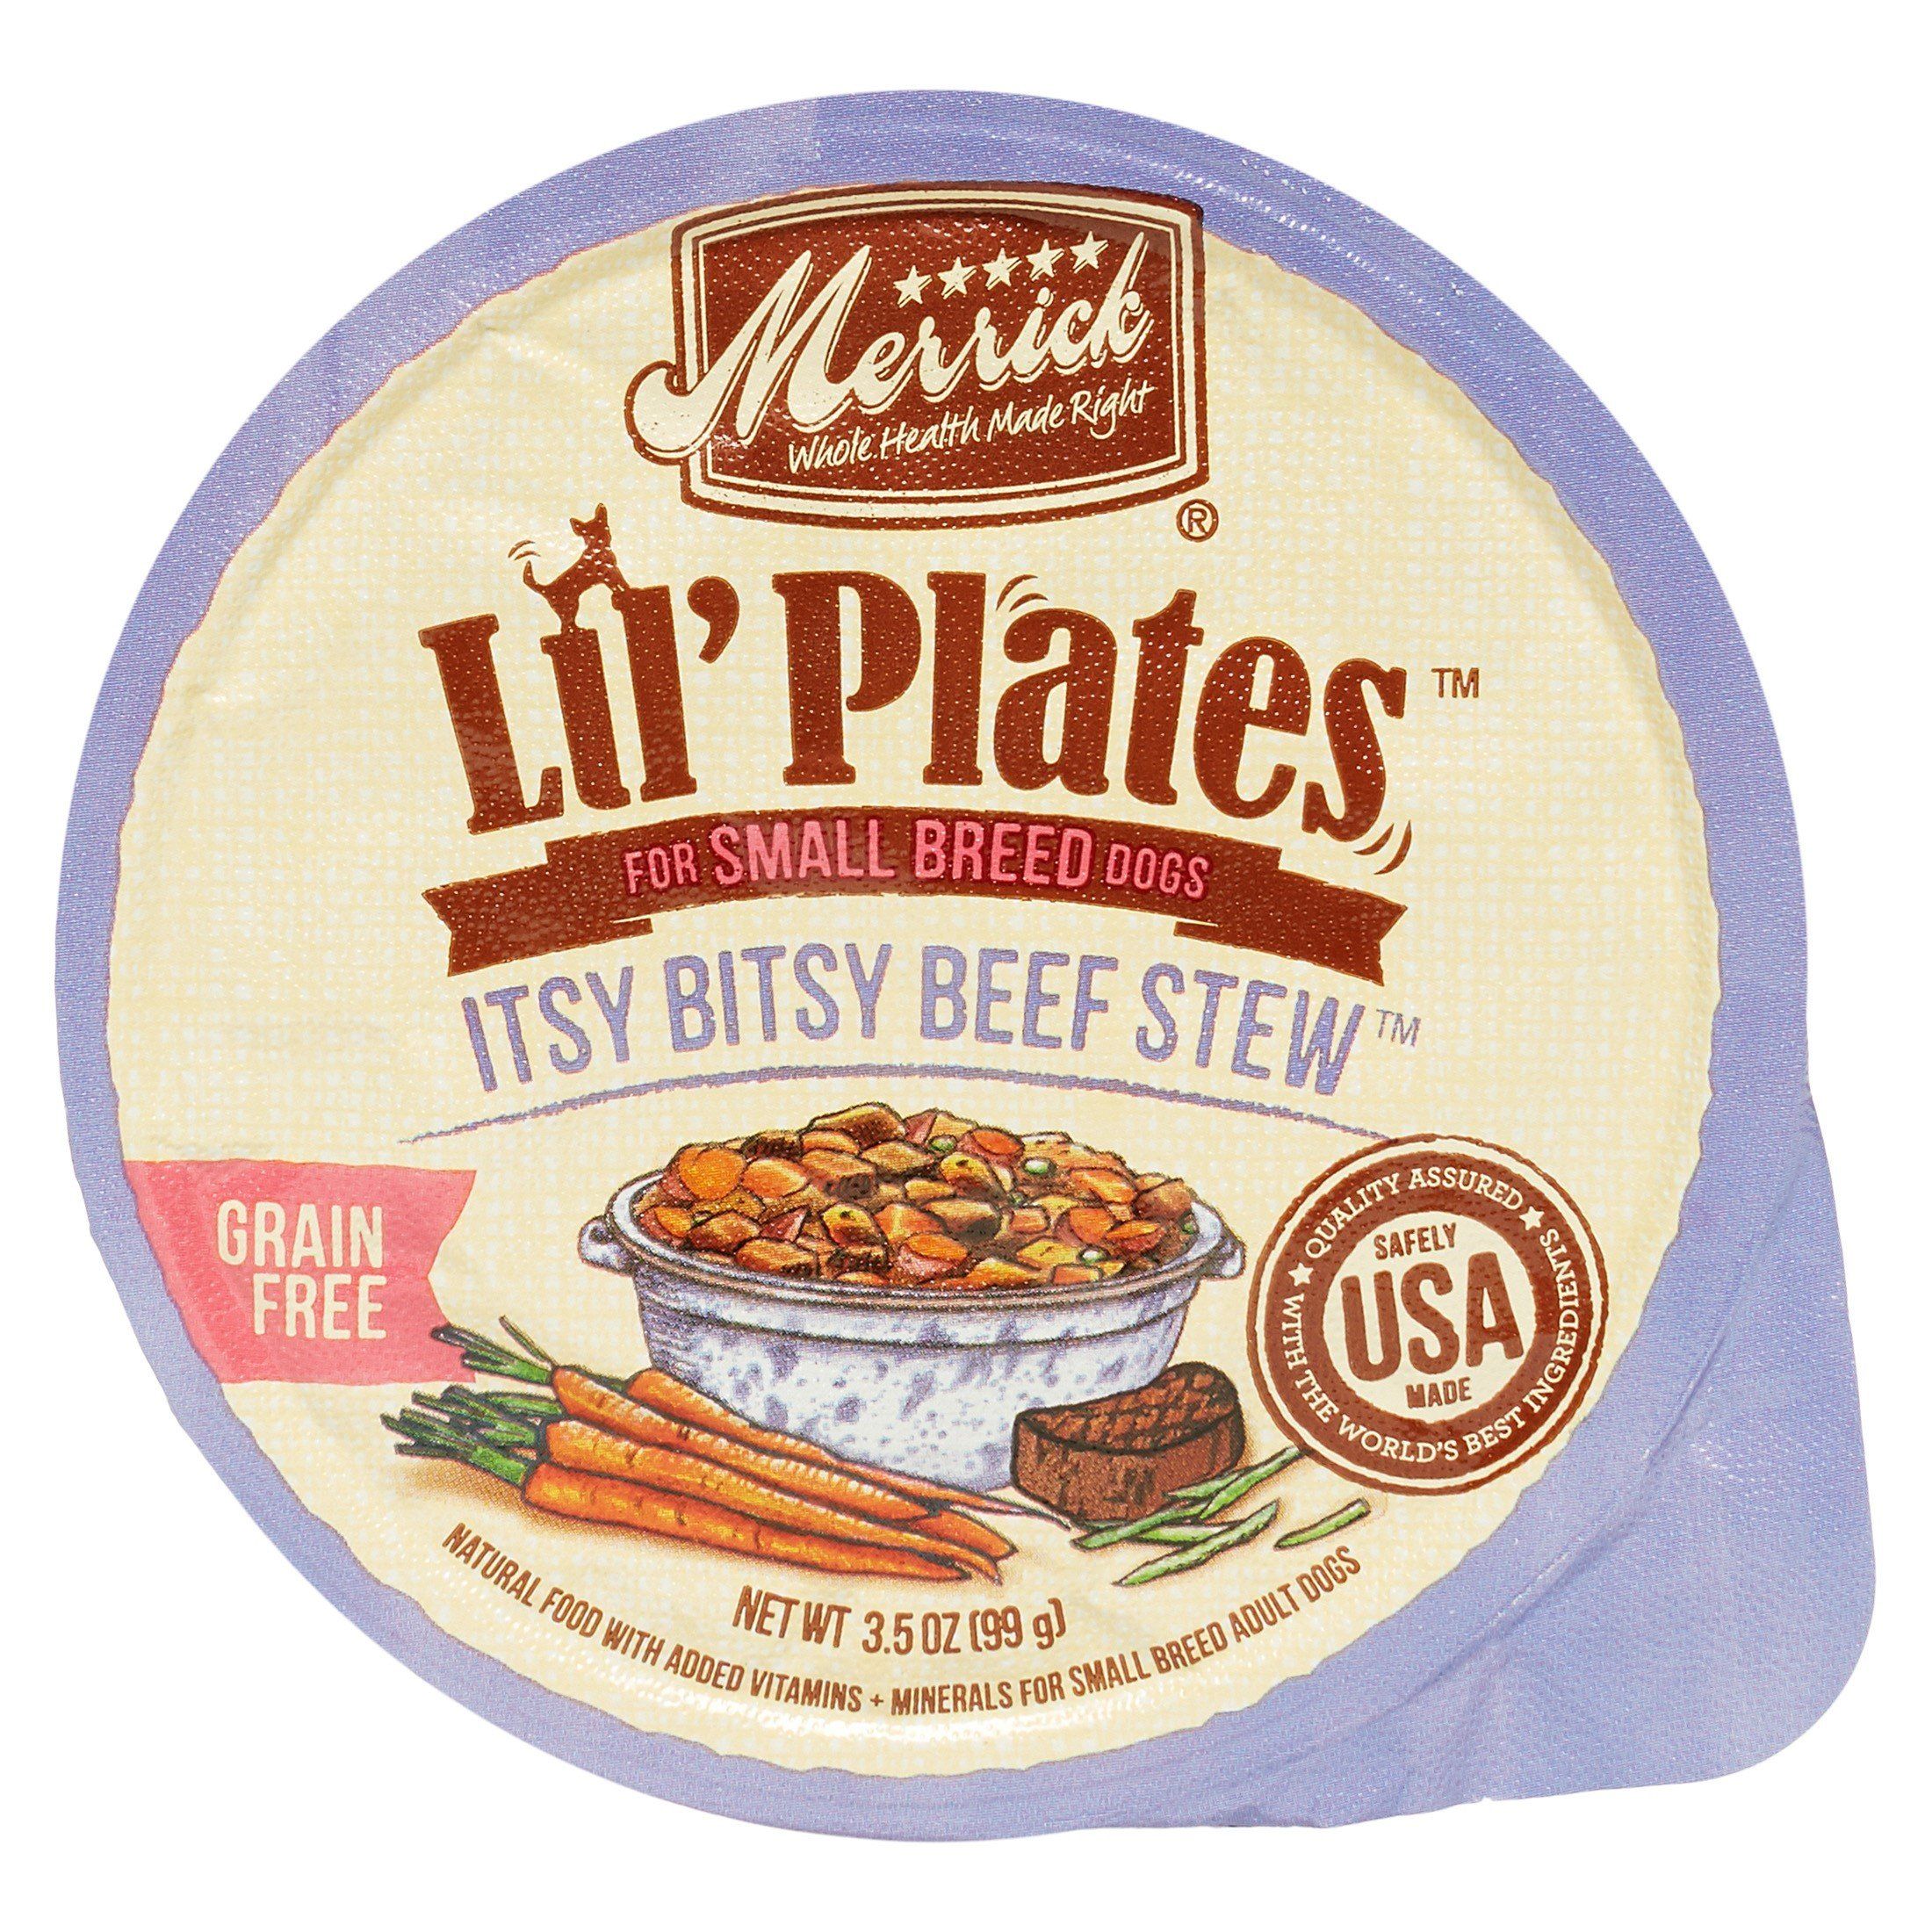 Merrick Lil' Plates Grain-Free Lil' Tubs Itsy Bitsy Beef Stew Small Breed Dog Food - 3.5 oz Tubs - Case of 12  